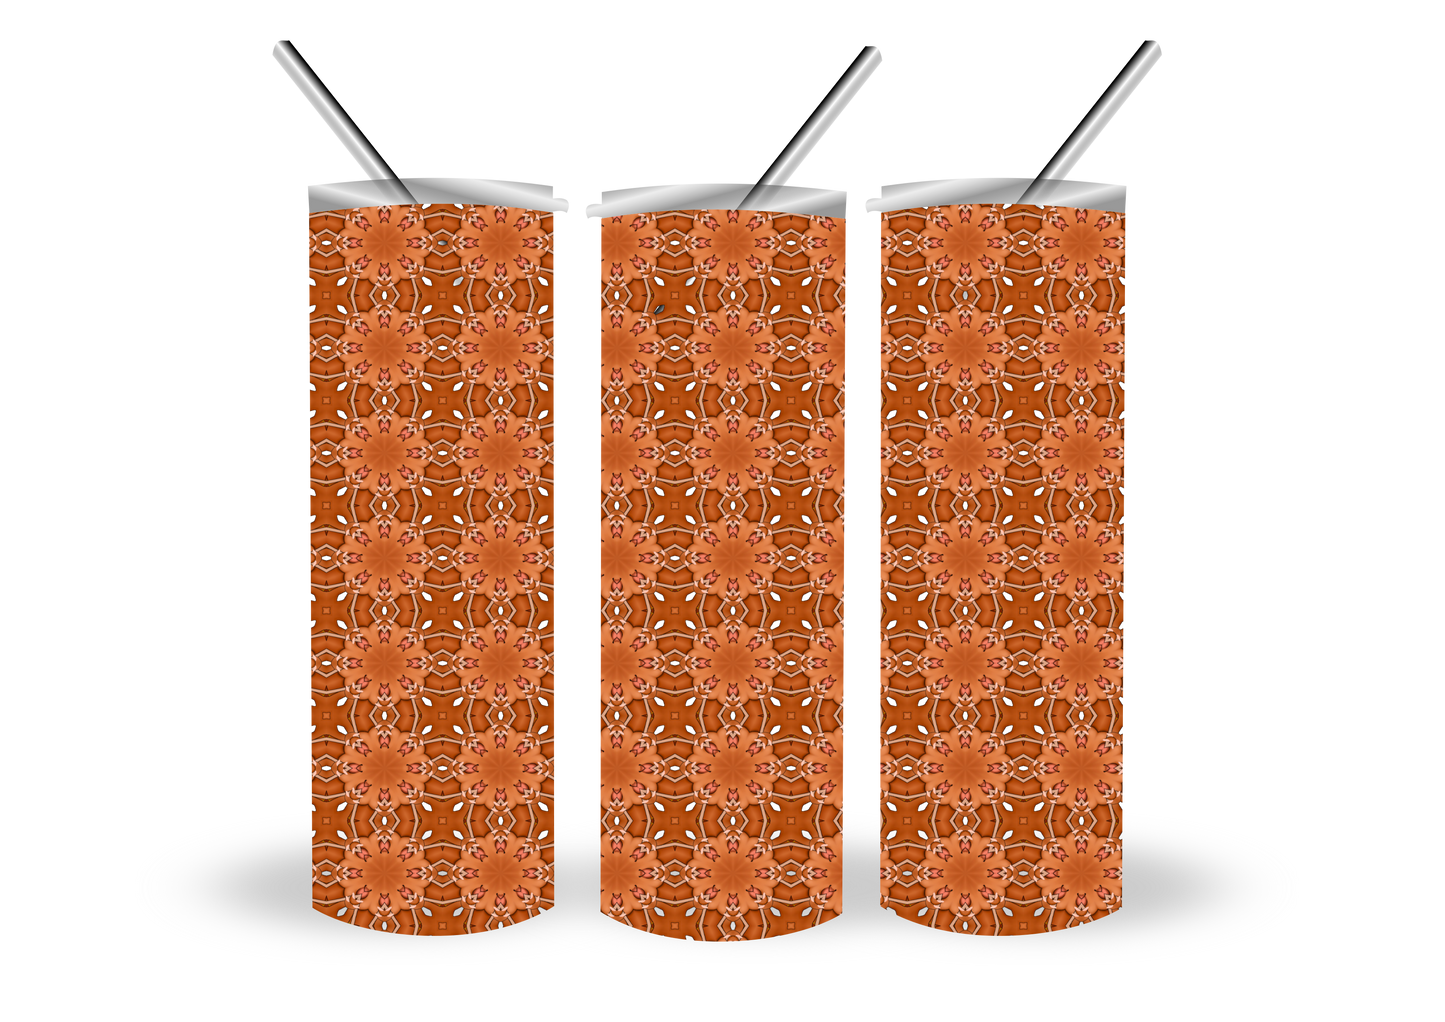 13 pieces of 20 oz tumbler backgrounds